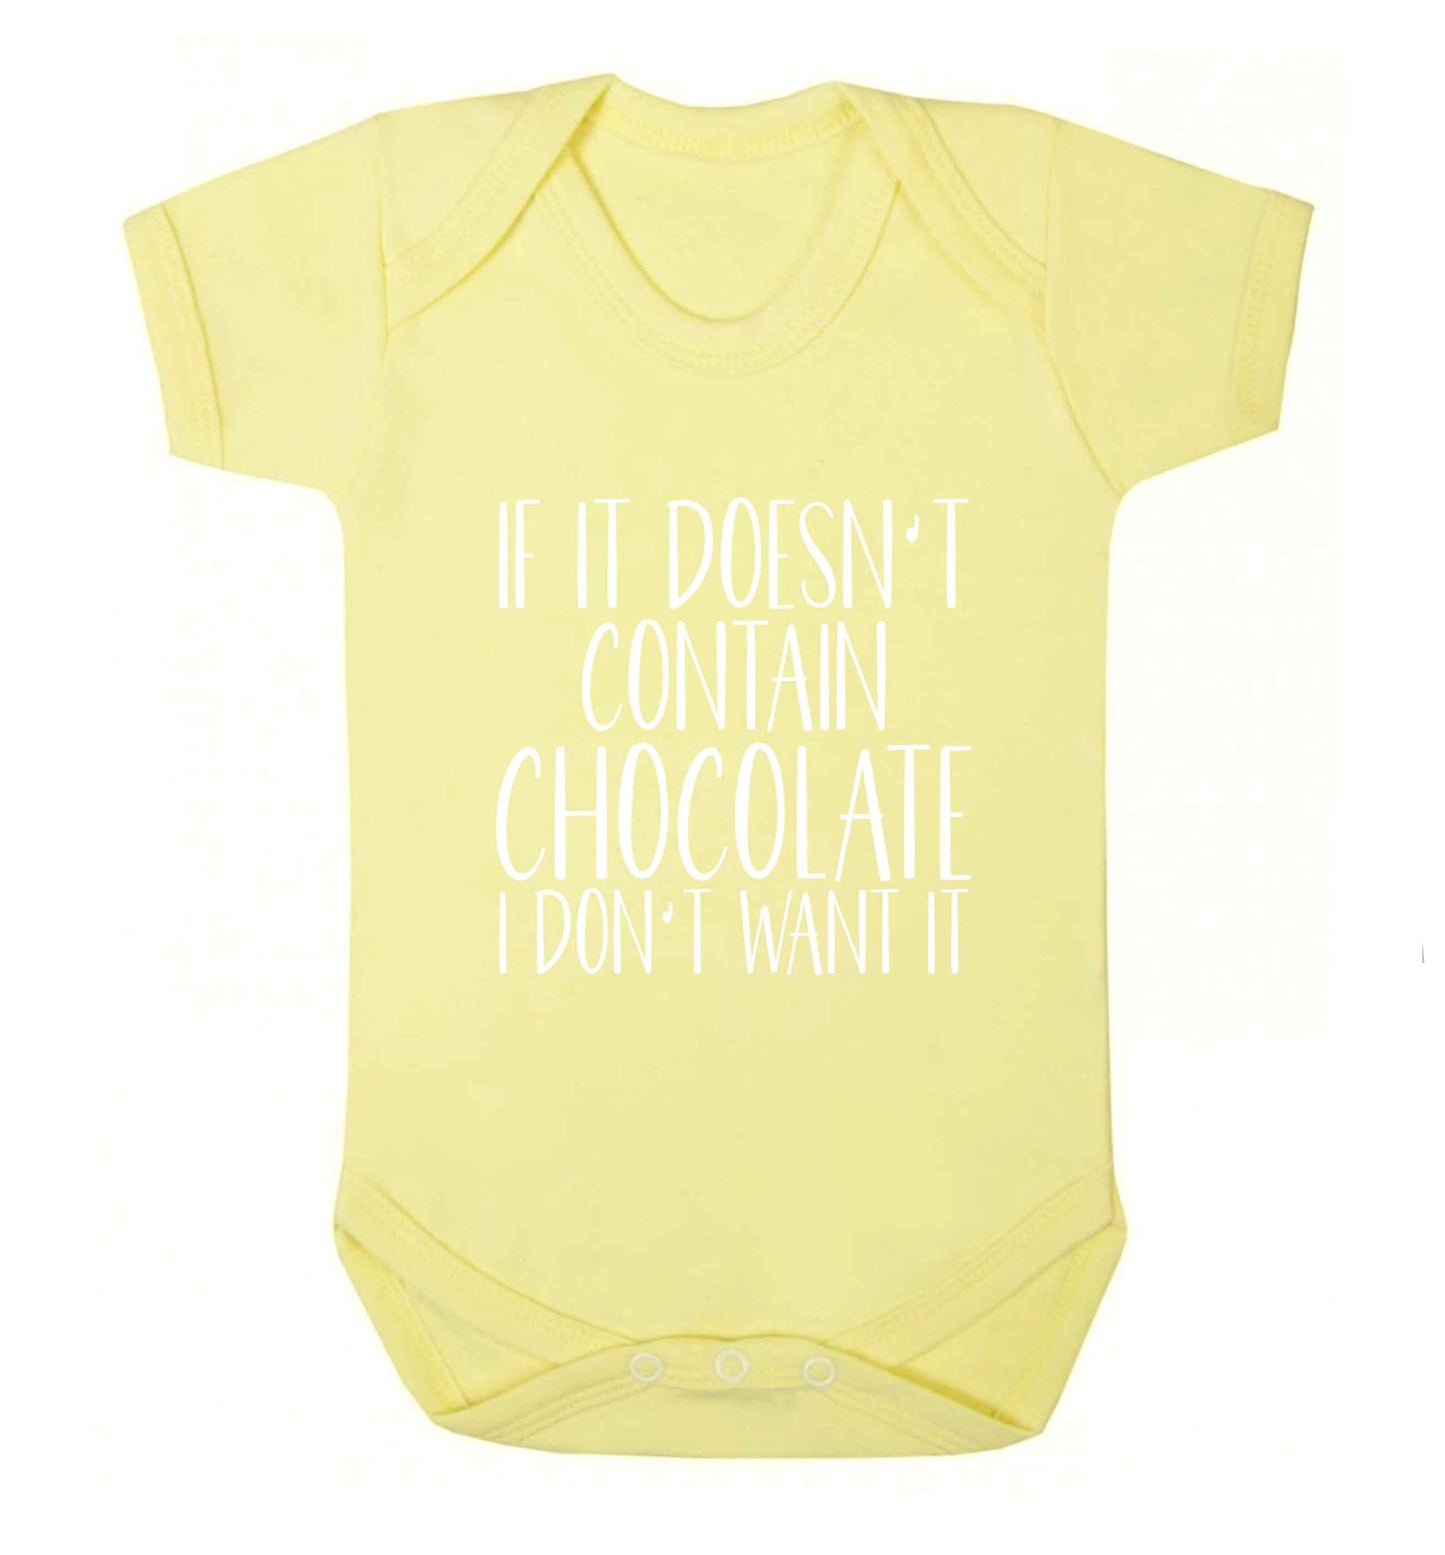 If it doesn't contain chocolate I don't want it baby vest pale yellow 18-24 months